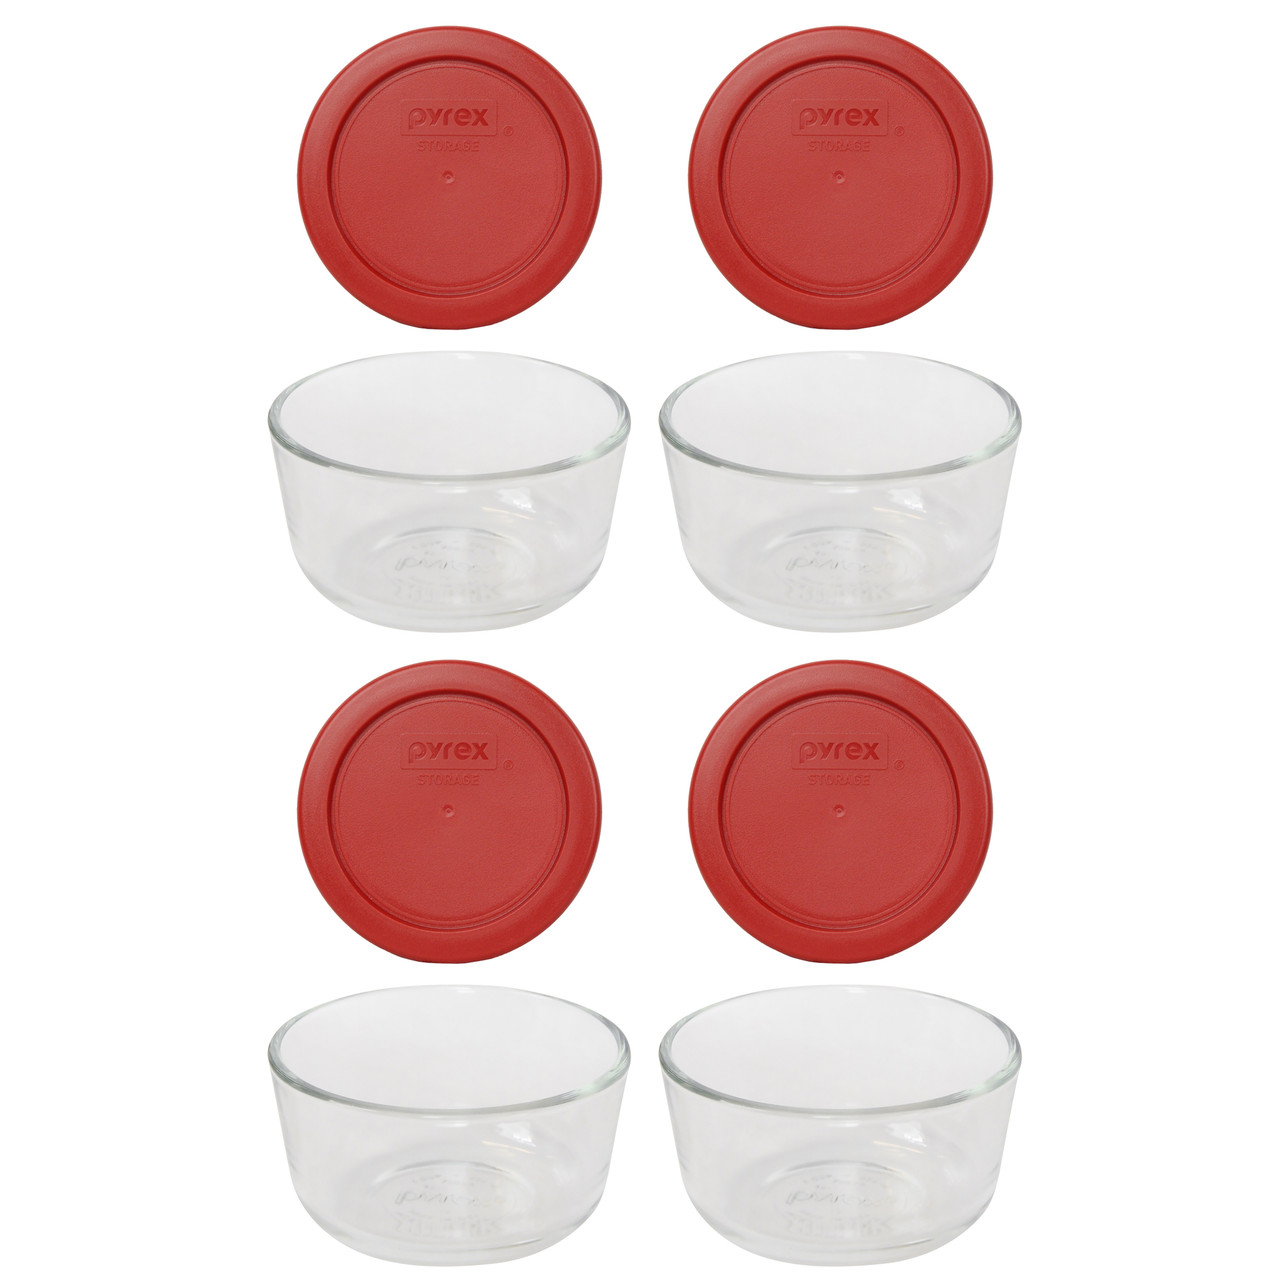 Pyrex 7202 1-Cup Glass Food Storage Bowls w/ Pyrex 7202-PC Poppy Red Lid Cover (4-Pack)